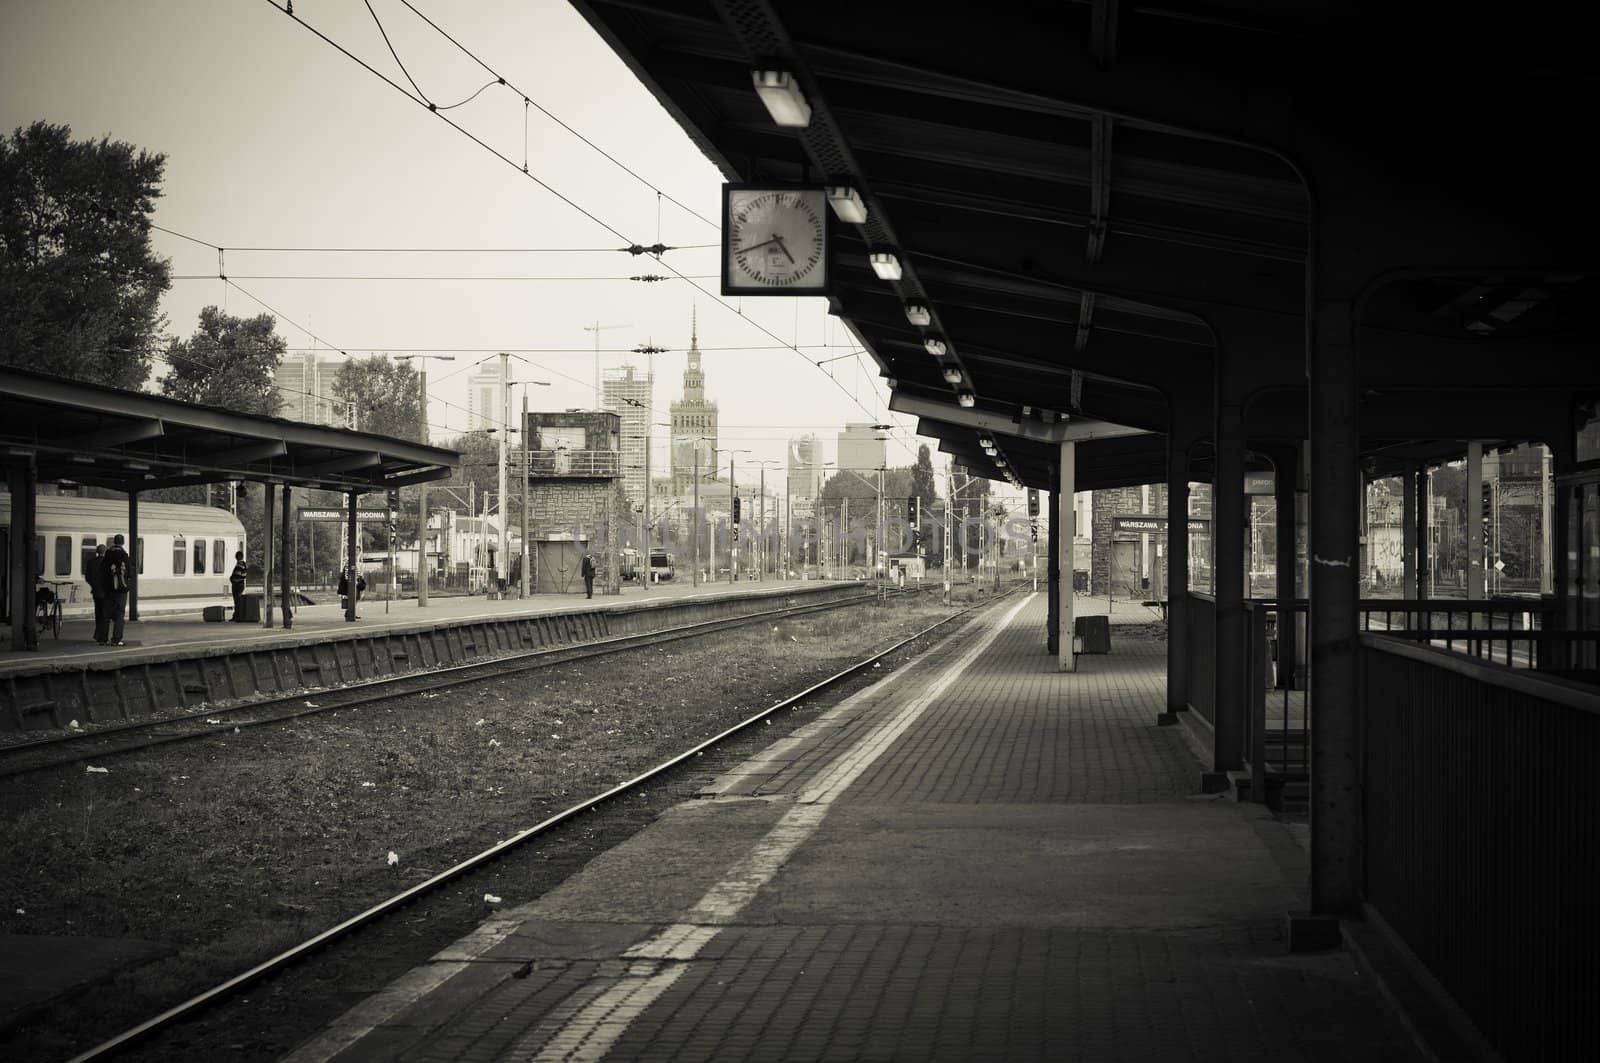 black and white photo of railway station in Poland "Warszawa Zachodnia" - palace of science and culture in the background